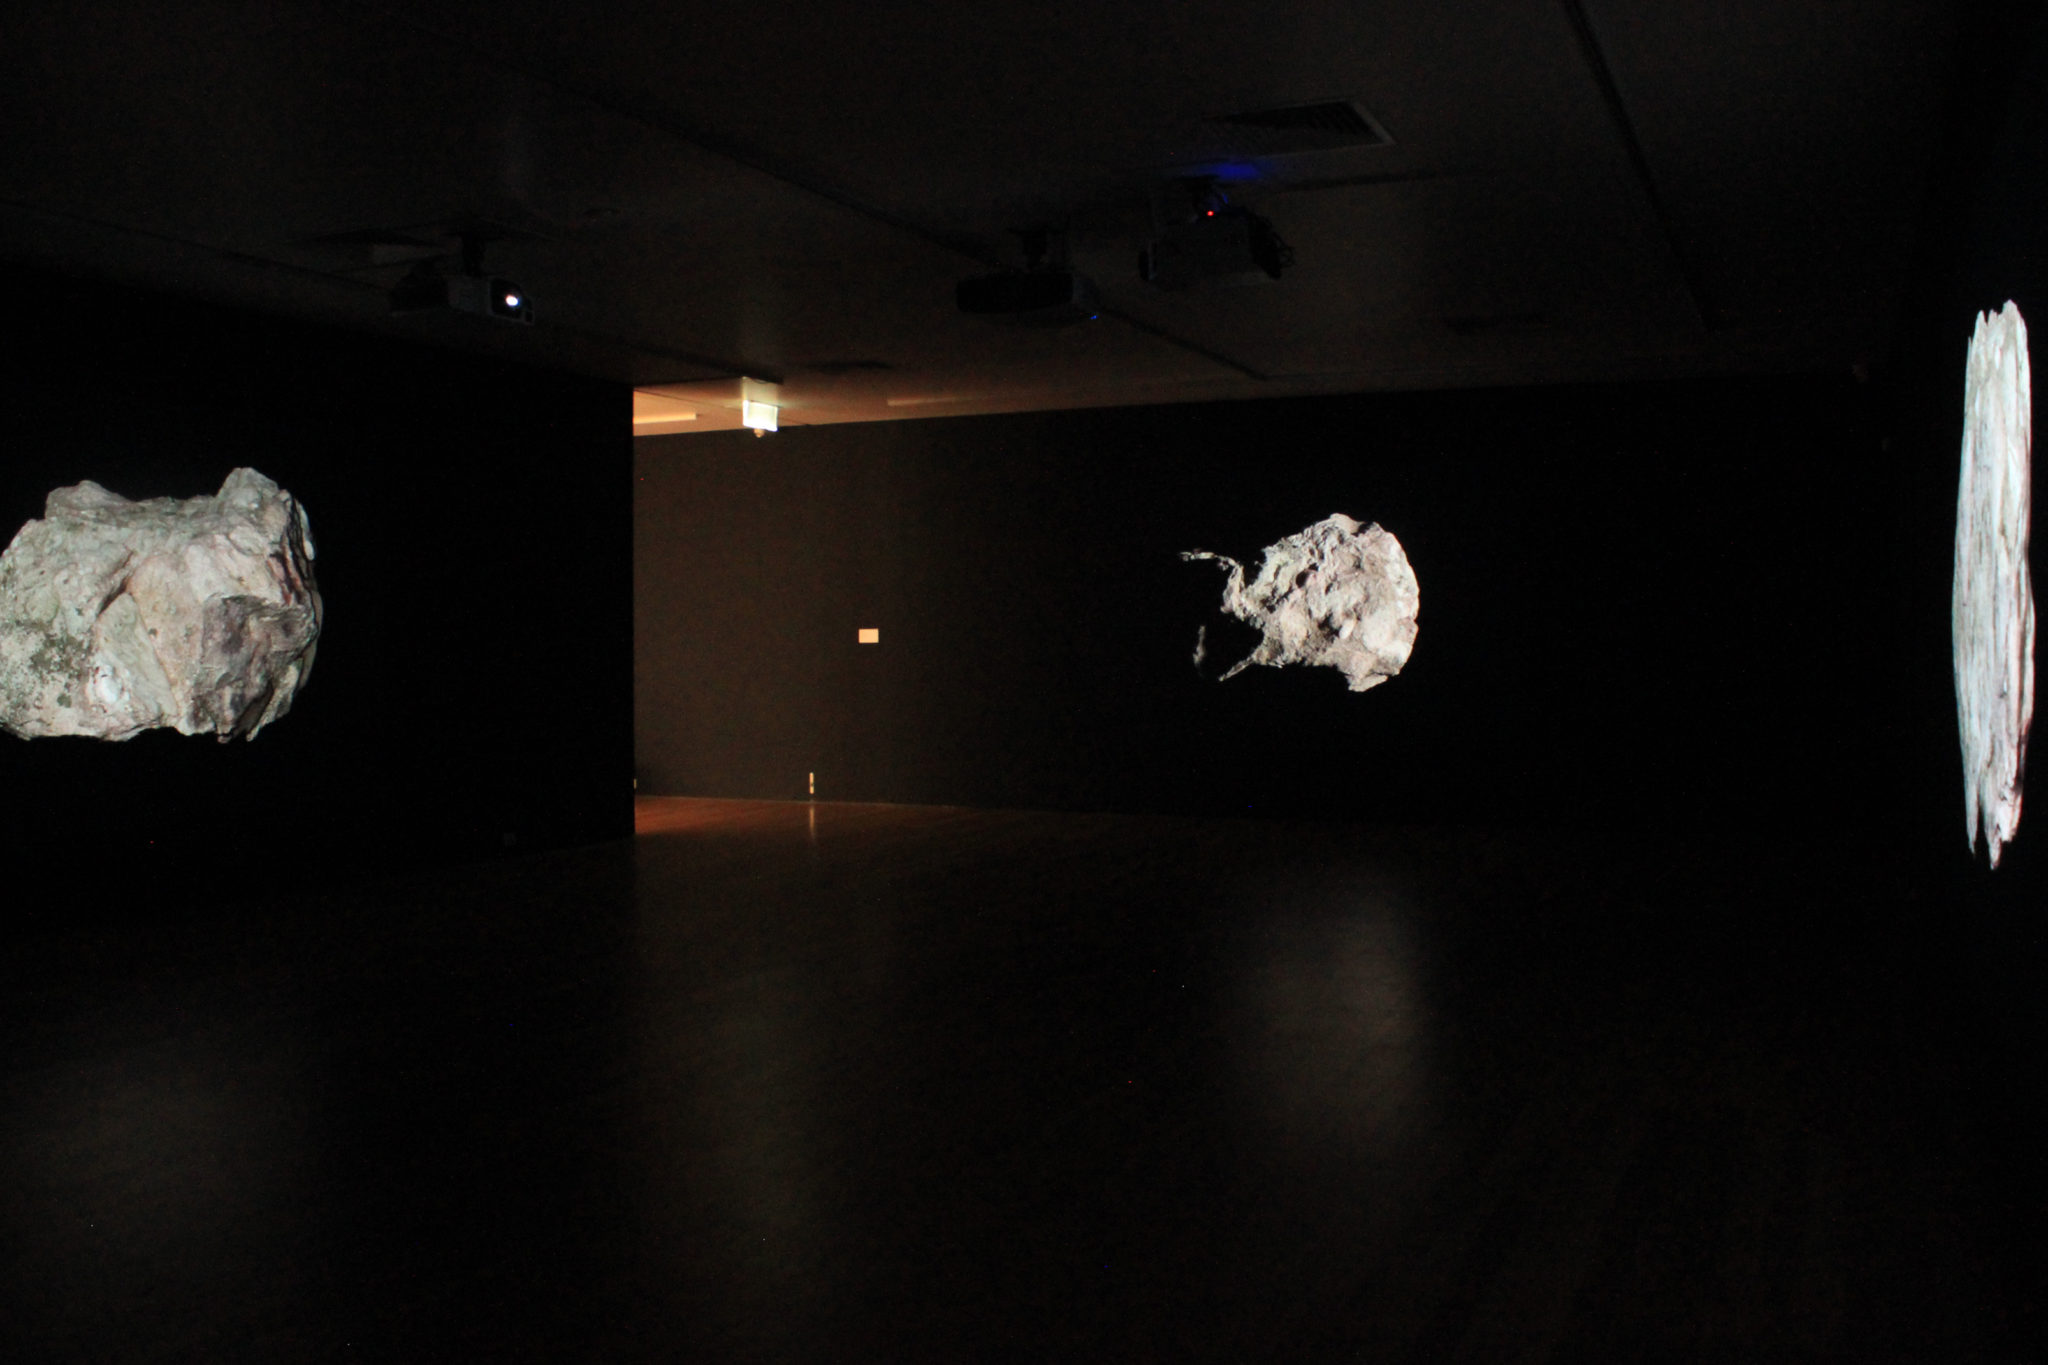 Exhibition documentation of Leigh Hobba, Any Which Way, 2007, Video installation, silent, Dimensions variable, Courtesy of the artist. Shown Gallery 5, Latrobe Regional Gallery, 2020.